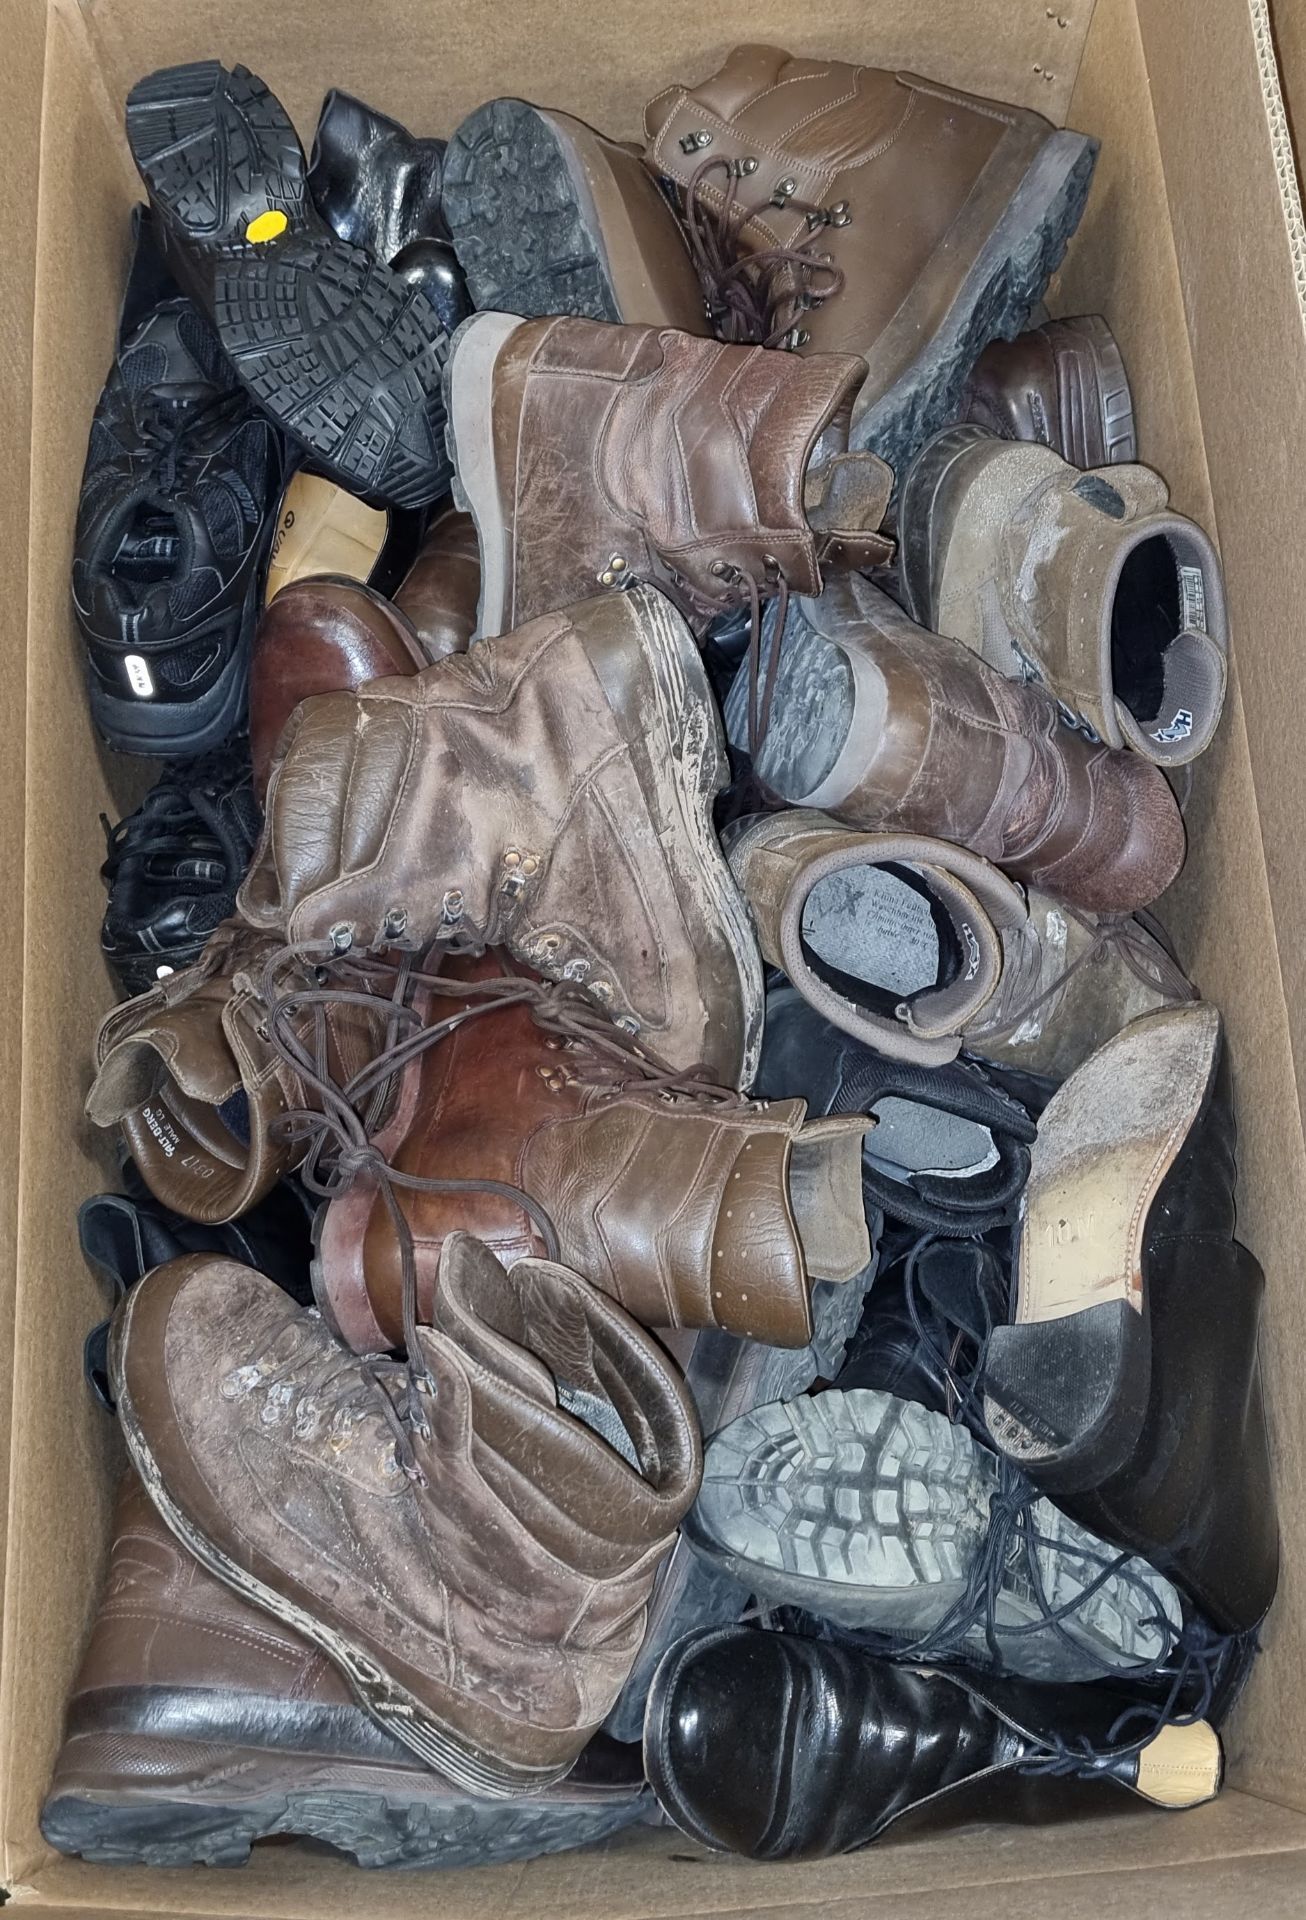 30x pairs of Various boots - Magnum Haix YDS - mixed grades and sizes